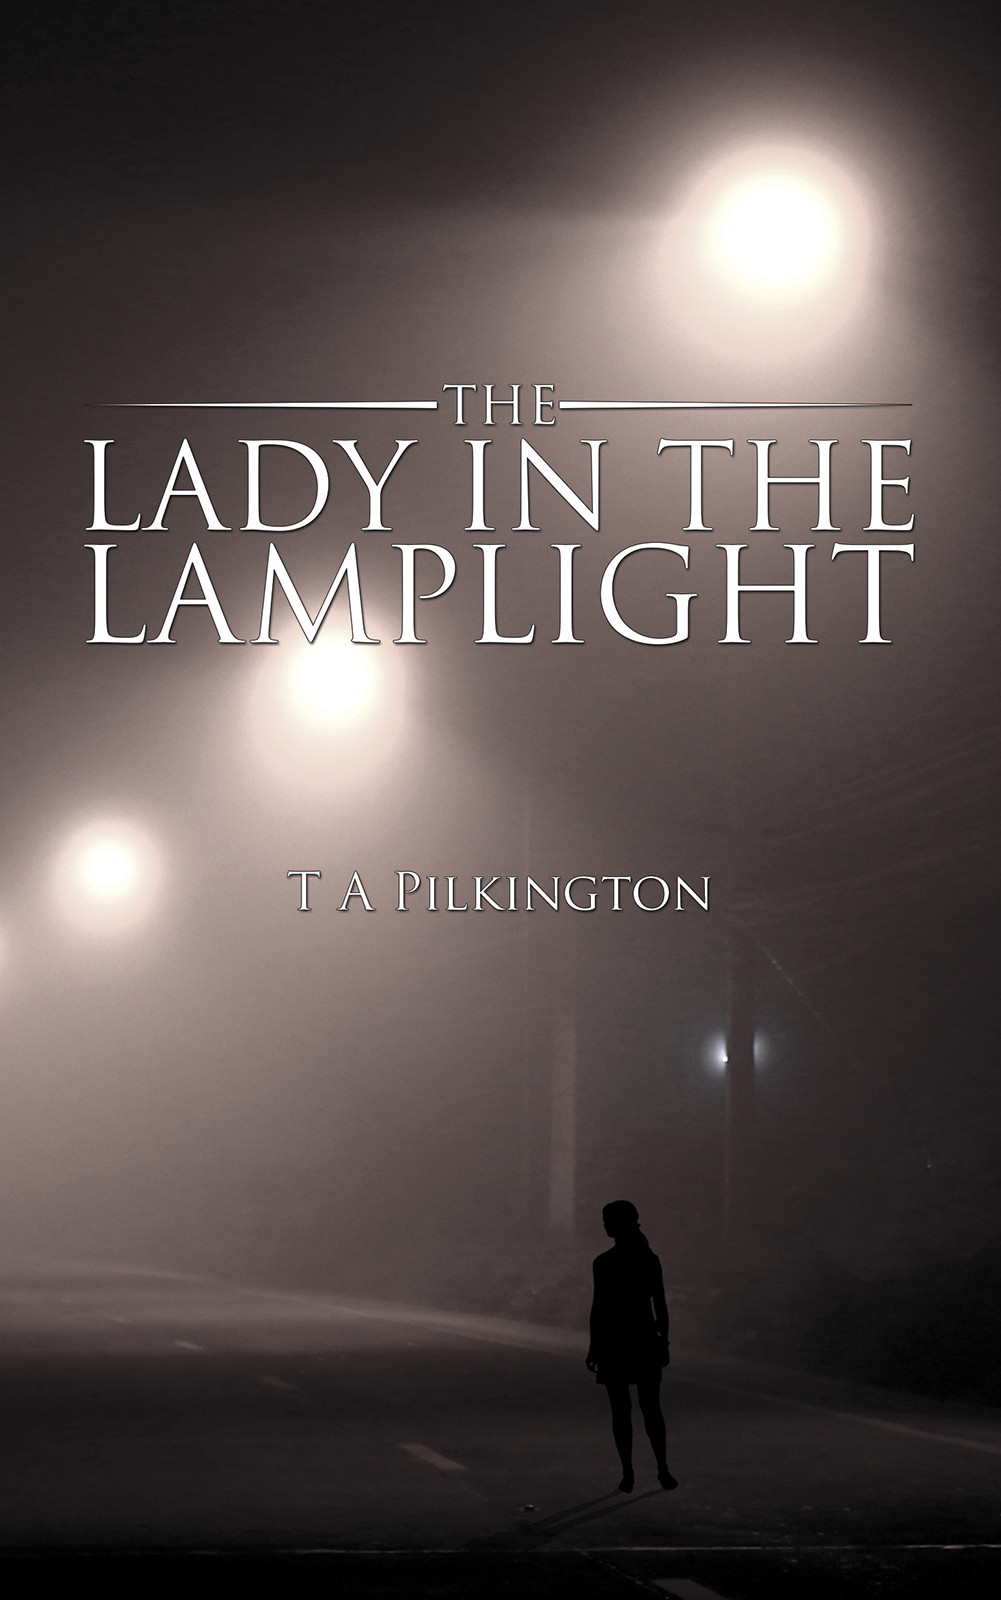 The Lady in the Lamplight